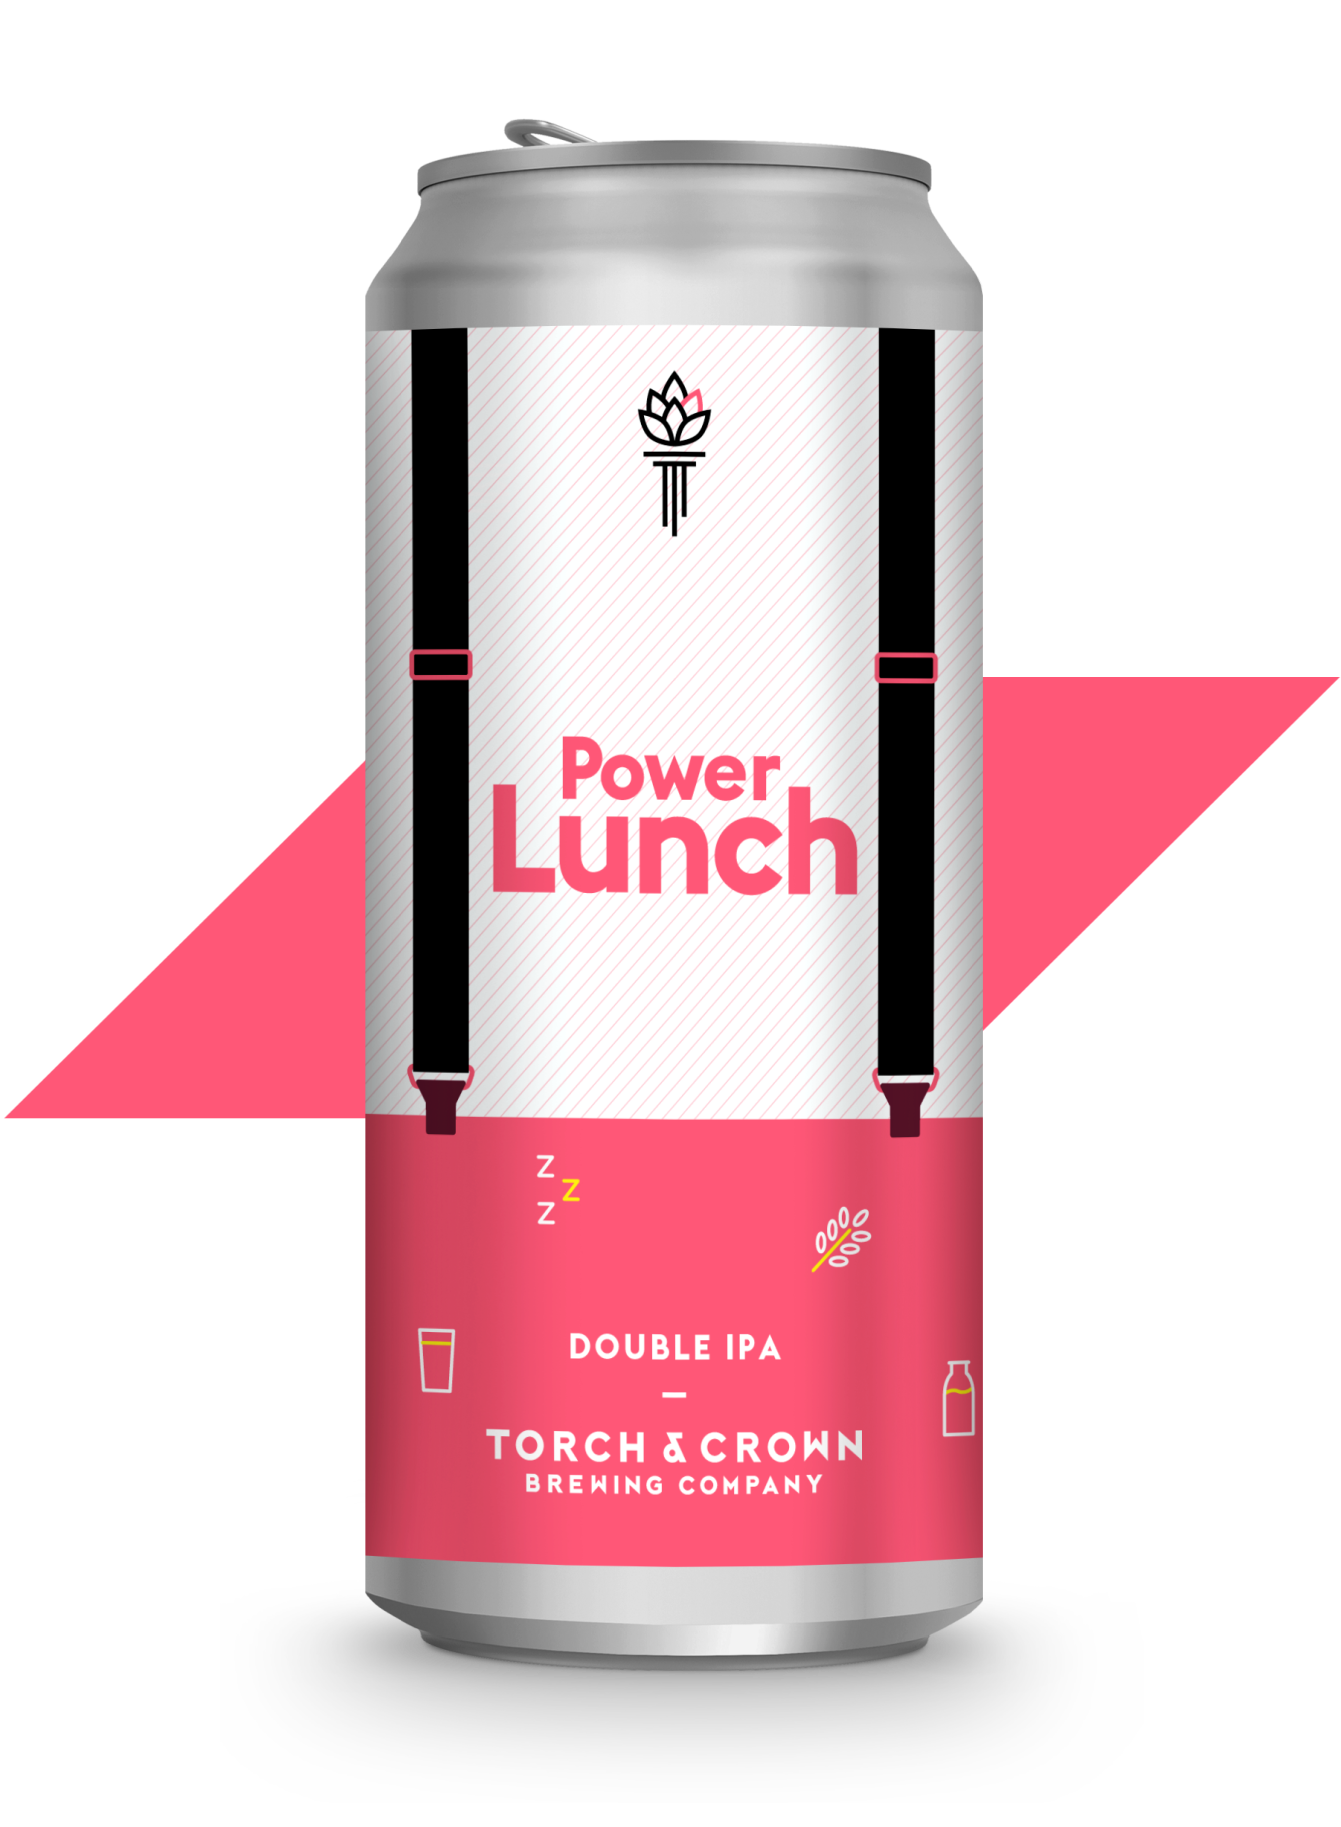 Power Lunch | Torch & Crown Brewing Company